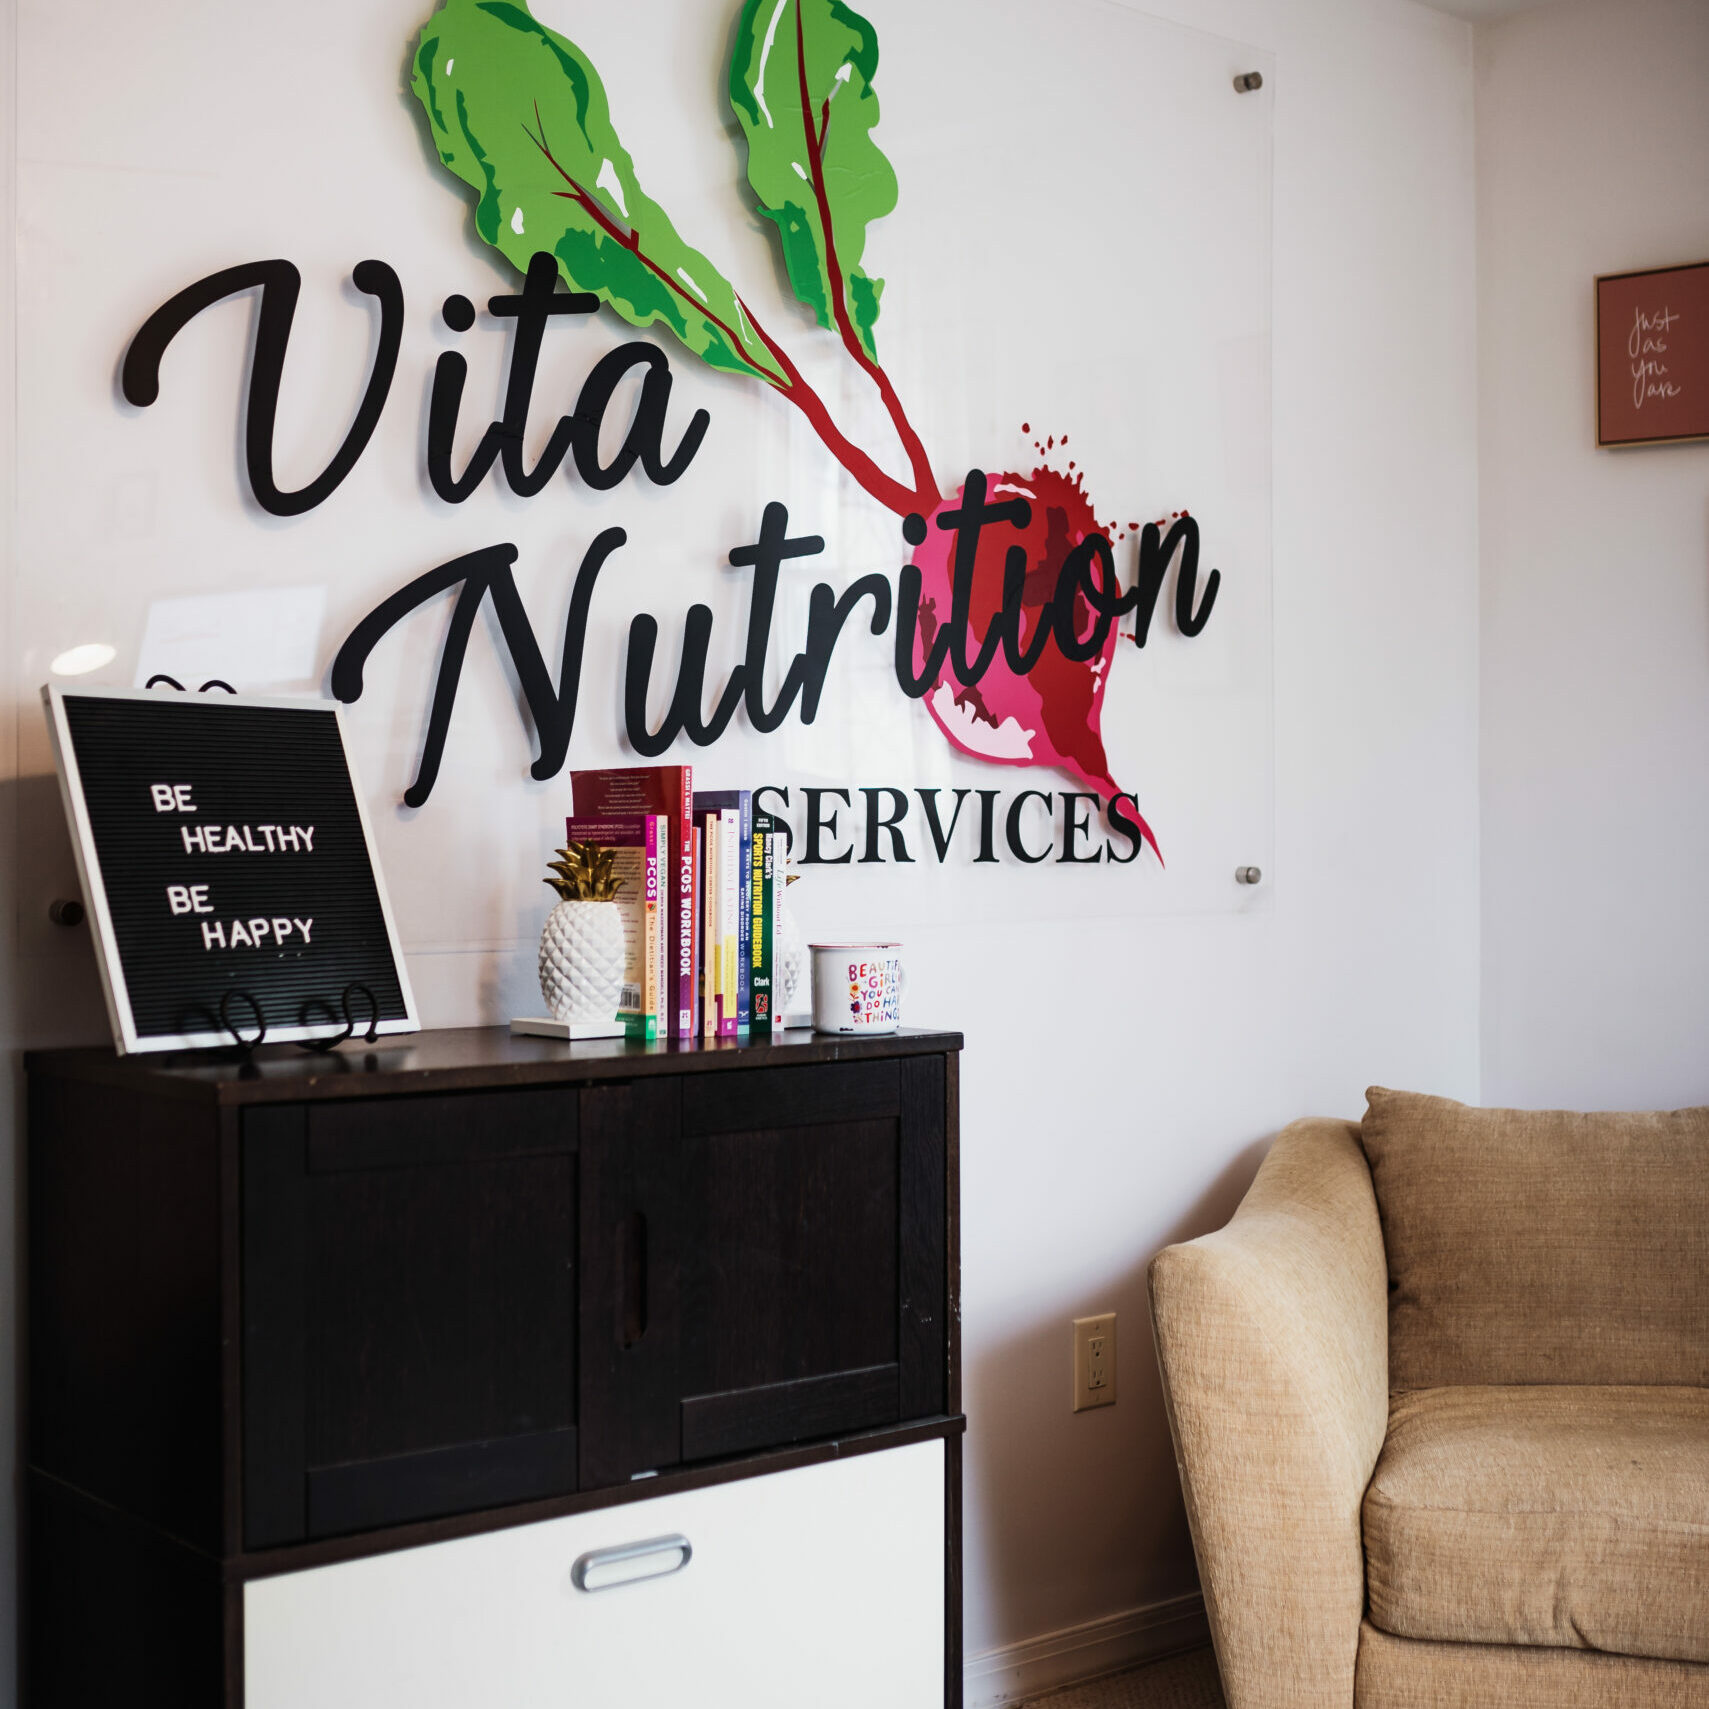 Picture of Vita Nutrition Counseling office where there are dietitian jobs available